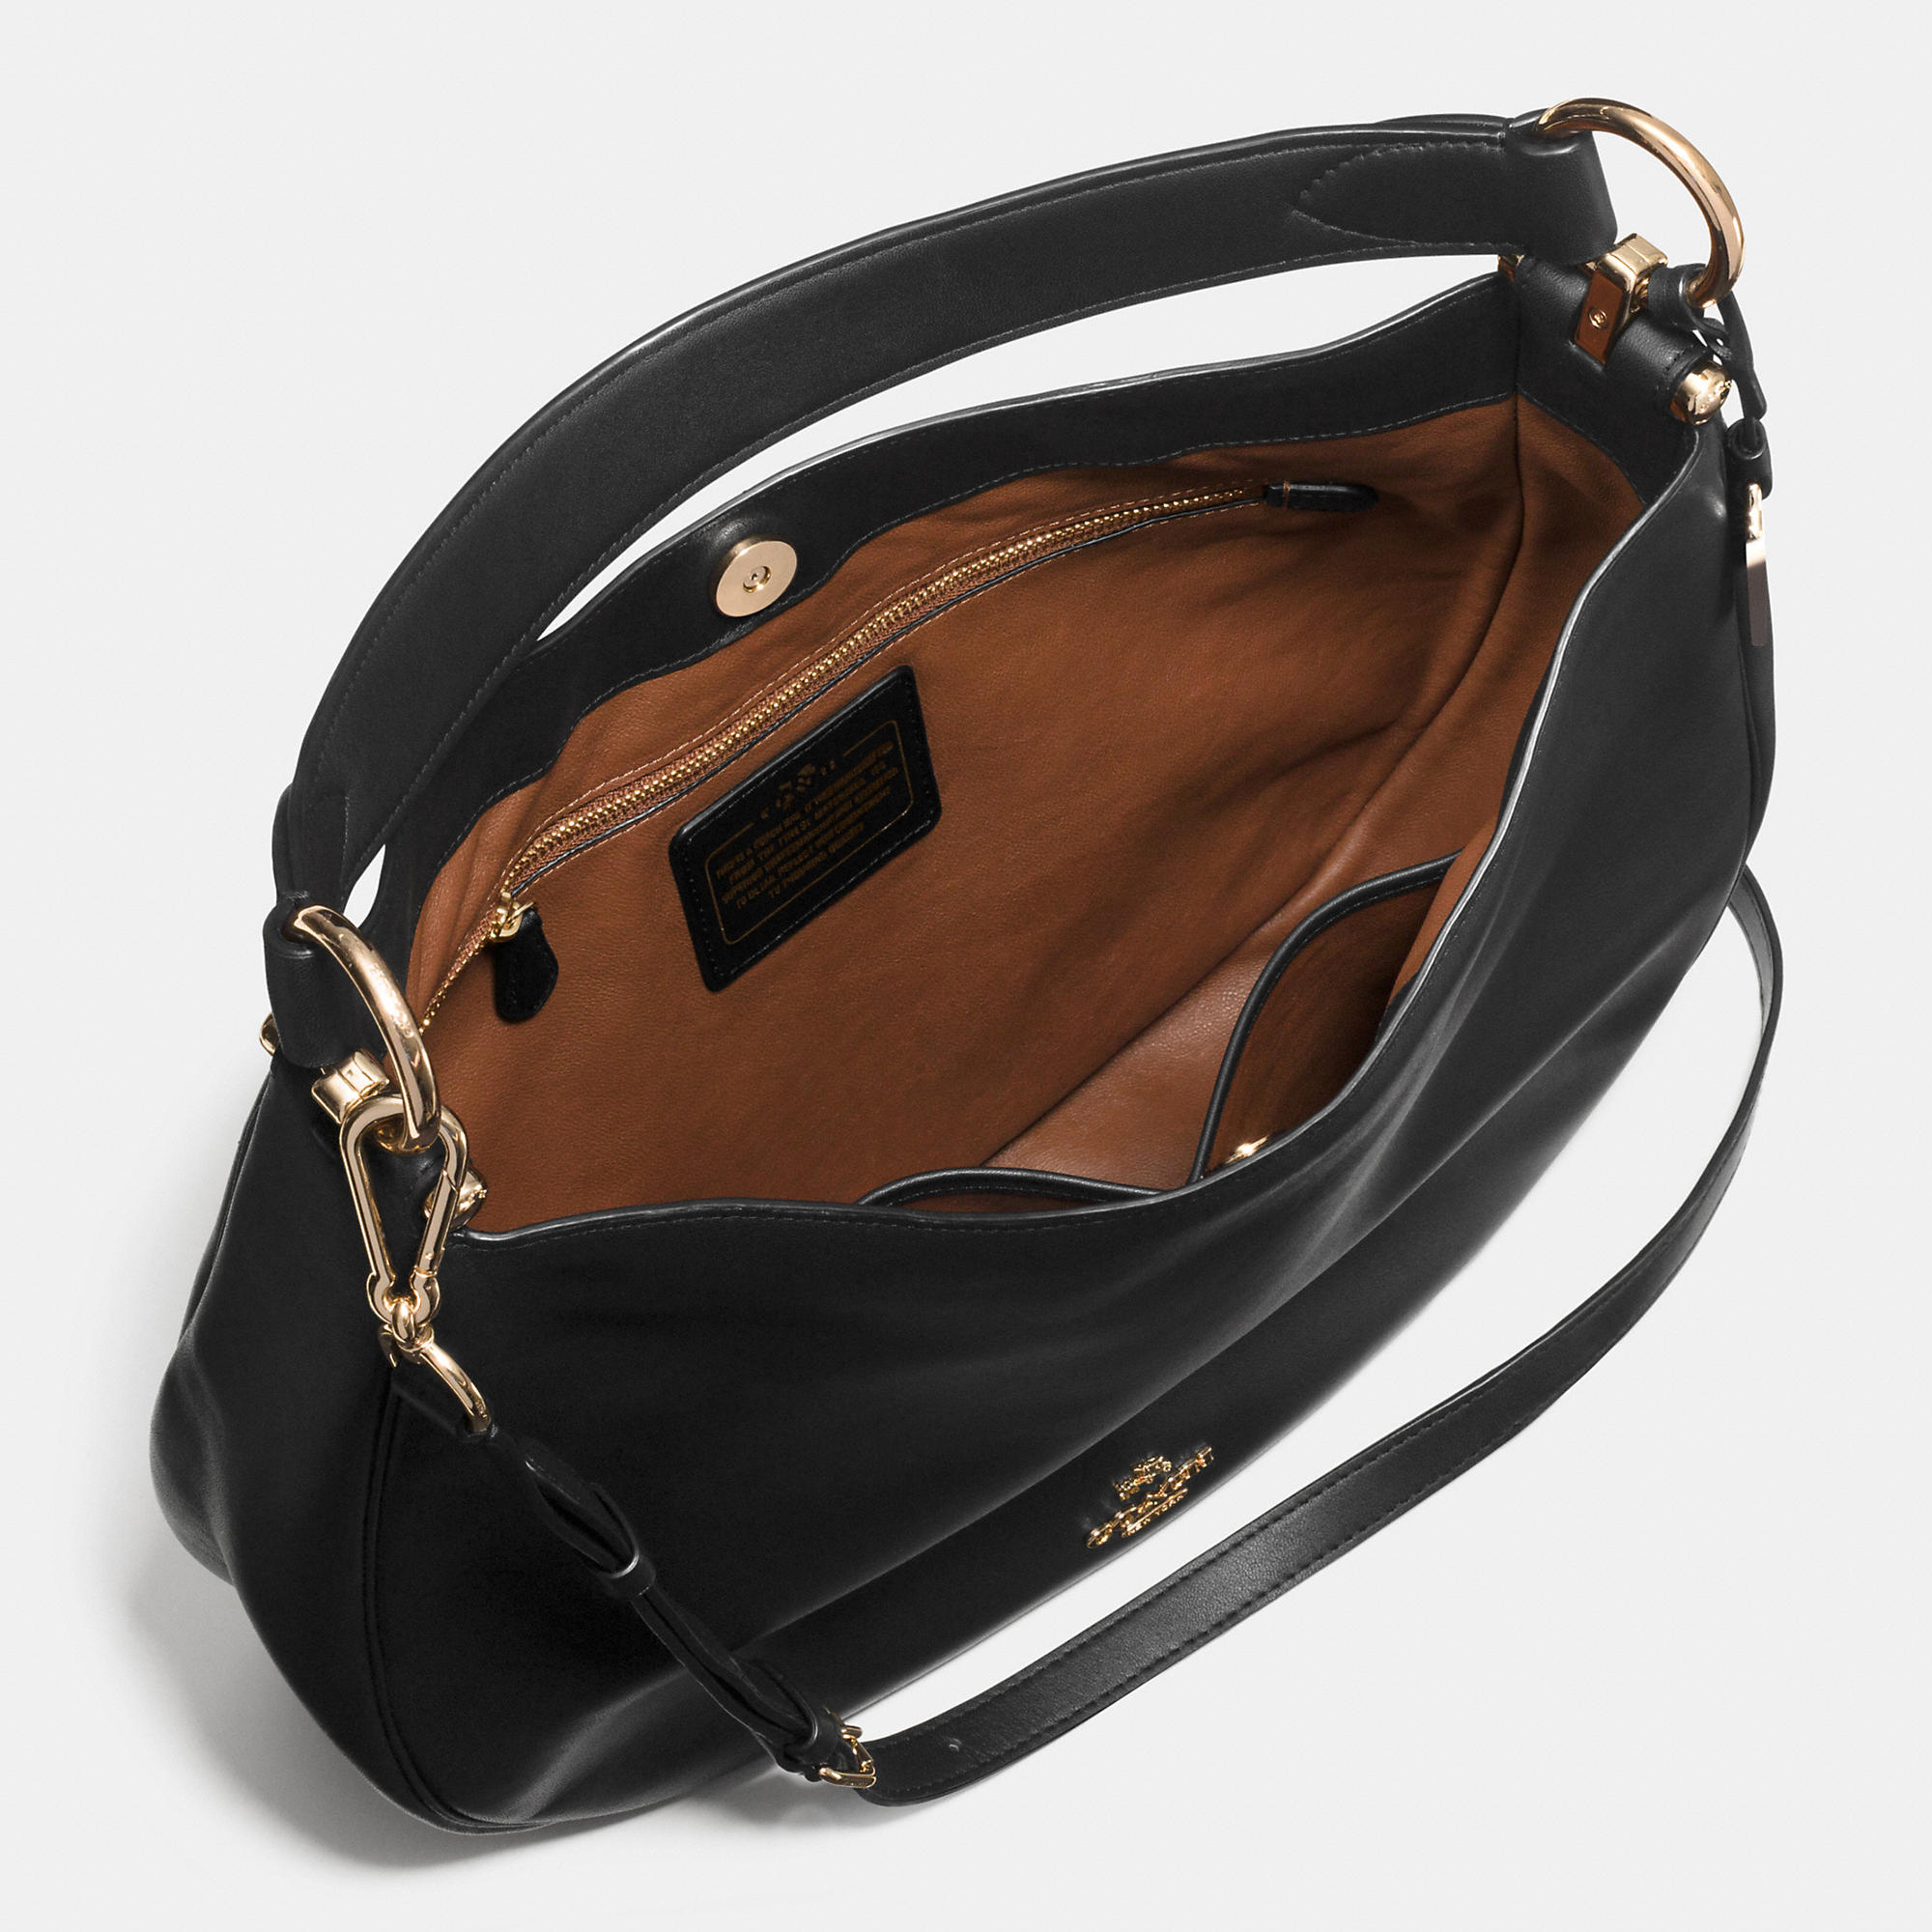 Luxury Brand Coach Nomad Hobo In Glovetanned Leather [coach20211964 ...